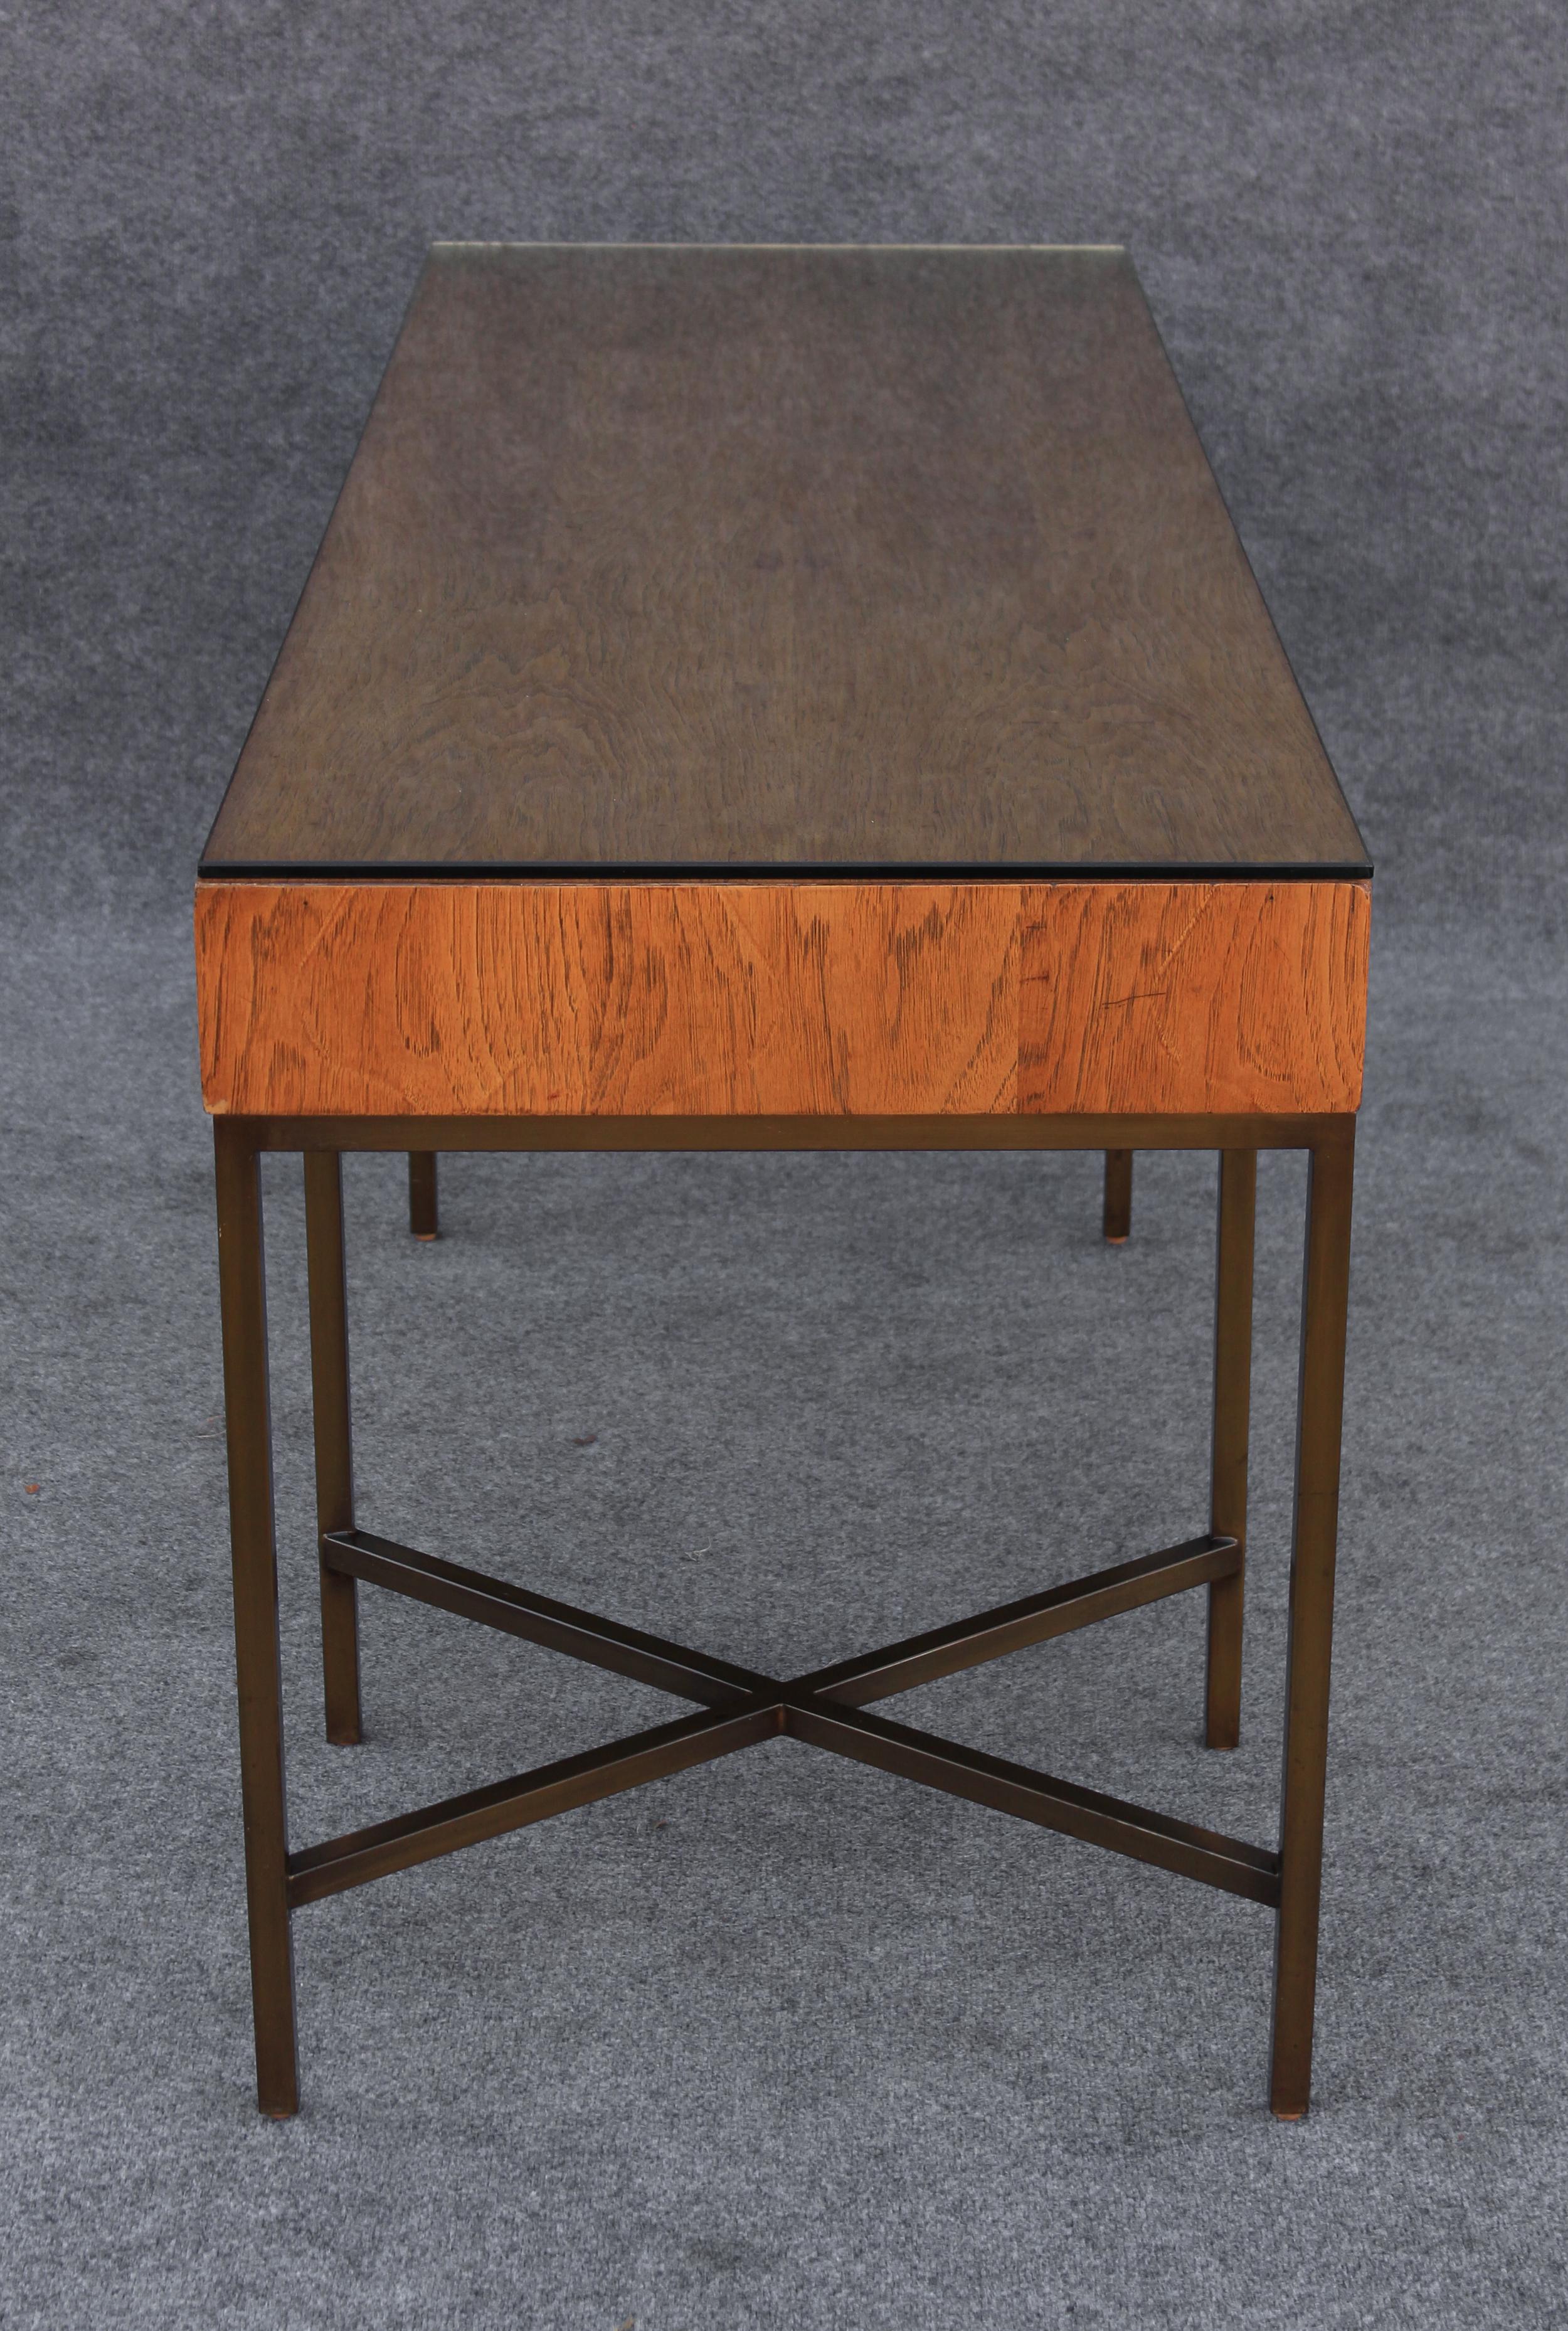 Mid-20th Century Restored Chestnut & Bronze 4-Drawer Large Desk by Jack Cartwright for Founders For Sale